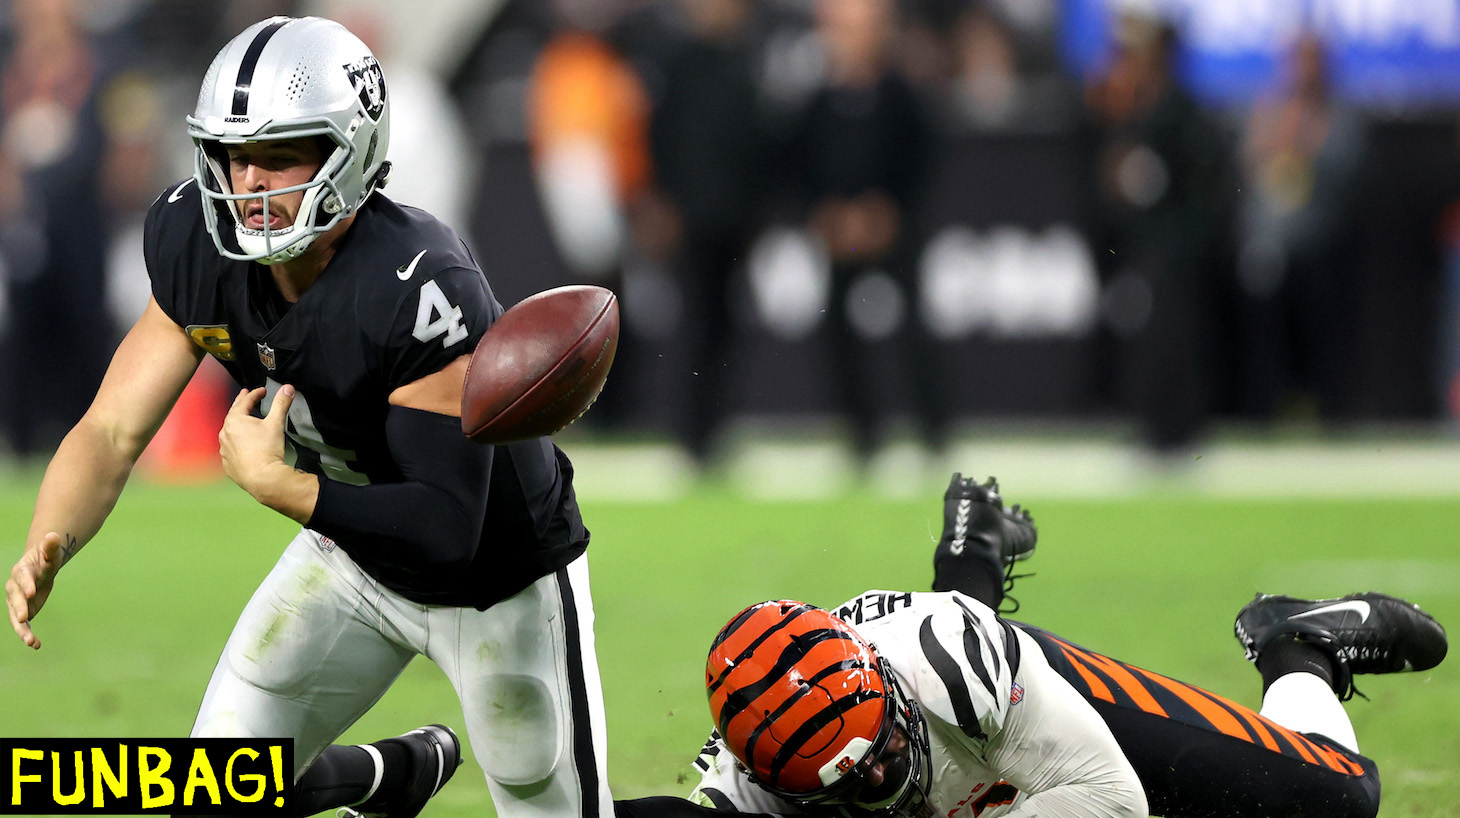 LAS VEGAS, NEVADA - NOVEMBER 21: Derek Carr #4 of the Las Vegas Raiders fumbles the ball during the fourth quarter in the game against the Cincinnati Bengals at Allegiant Stadium on November 21, 2021 in Las Vegas, Nevada. (Photo by Matthew Stockman/Getty Images)